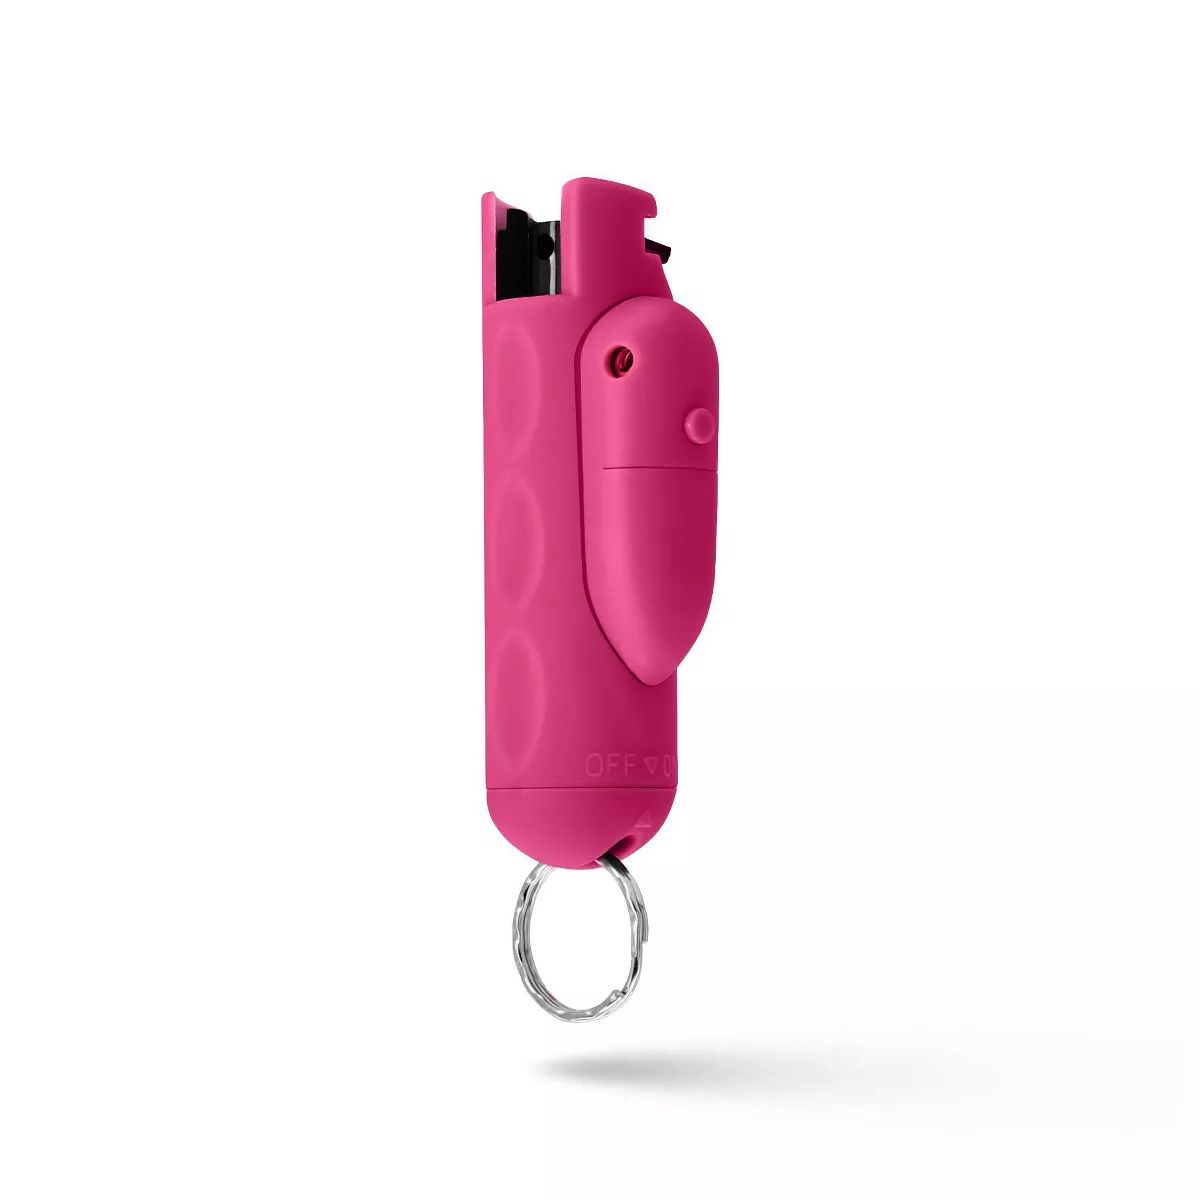 Guard Dog Security AccuFire 2 Pepper Spray with Laser Assist SnapShot Release 16' Distance Pink | Target